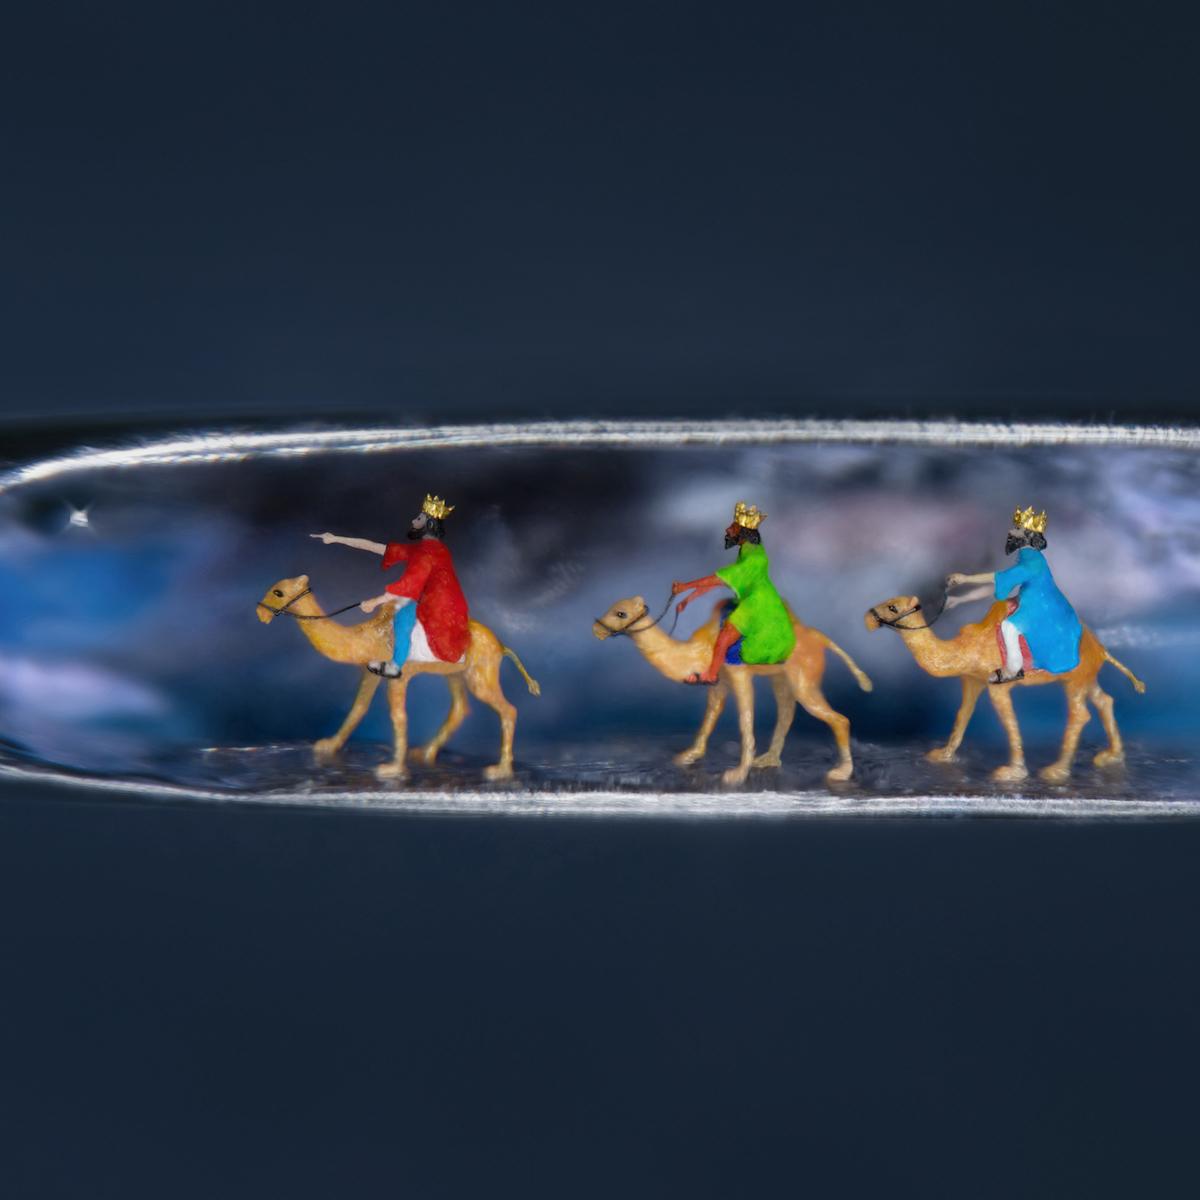 Mr. Wigan worked around 16 hours a day over four weeks to sculpt "The Three Little Kings" inside the eye of a needle. (Courtesy of Paul Ward Photography via Willard Wigan)